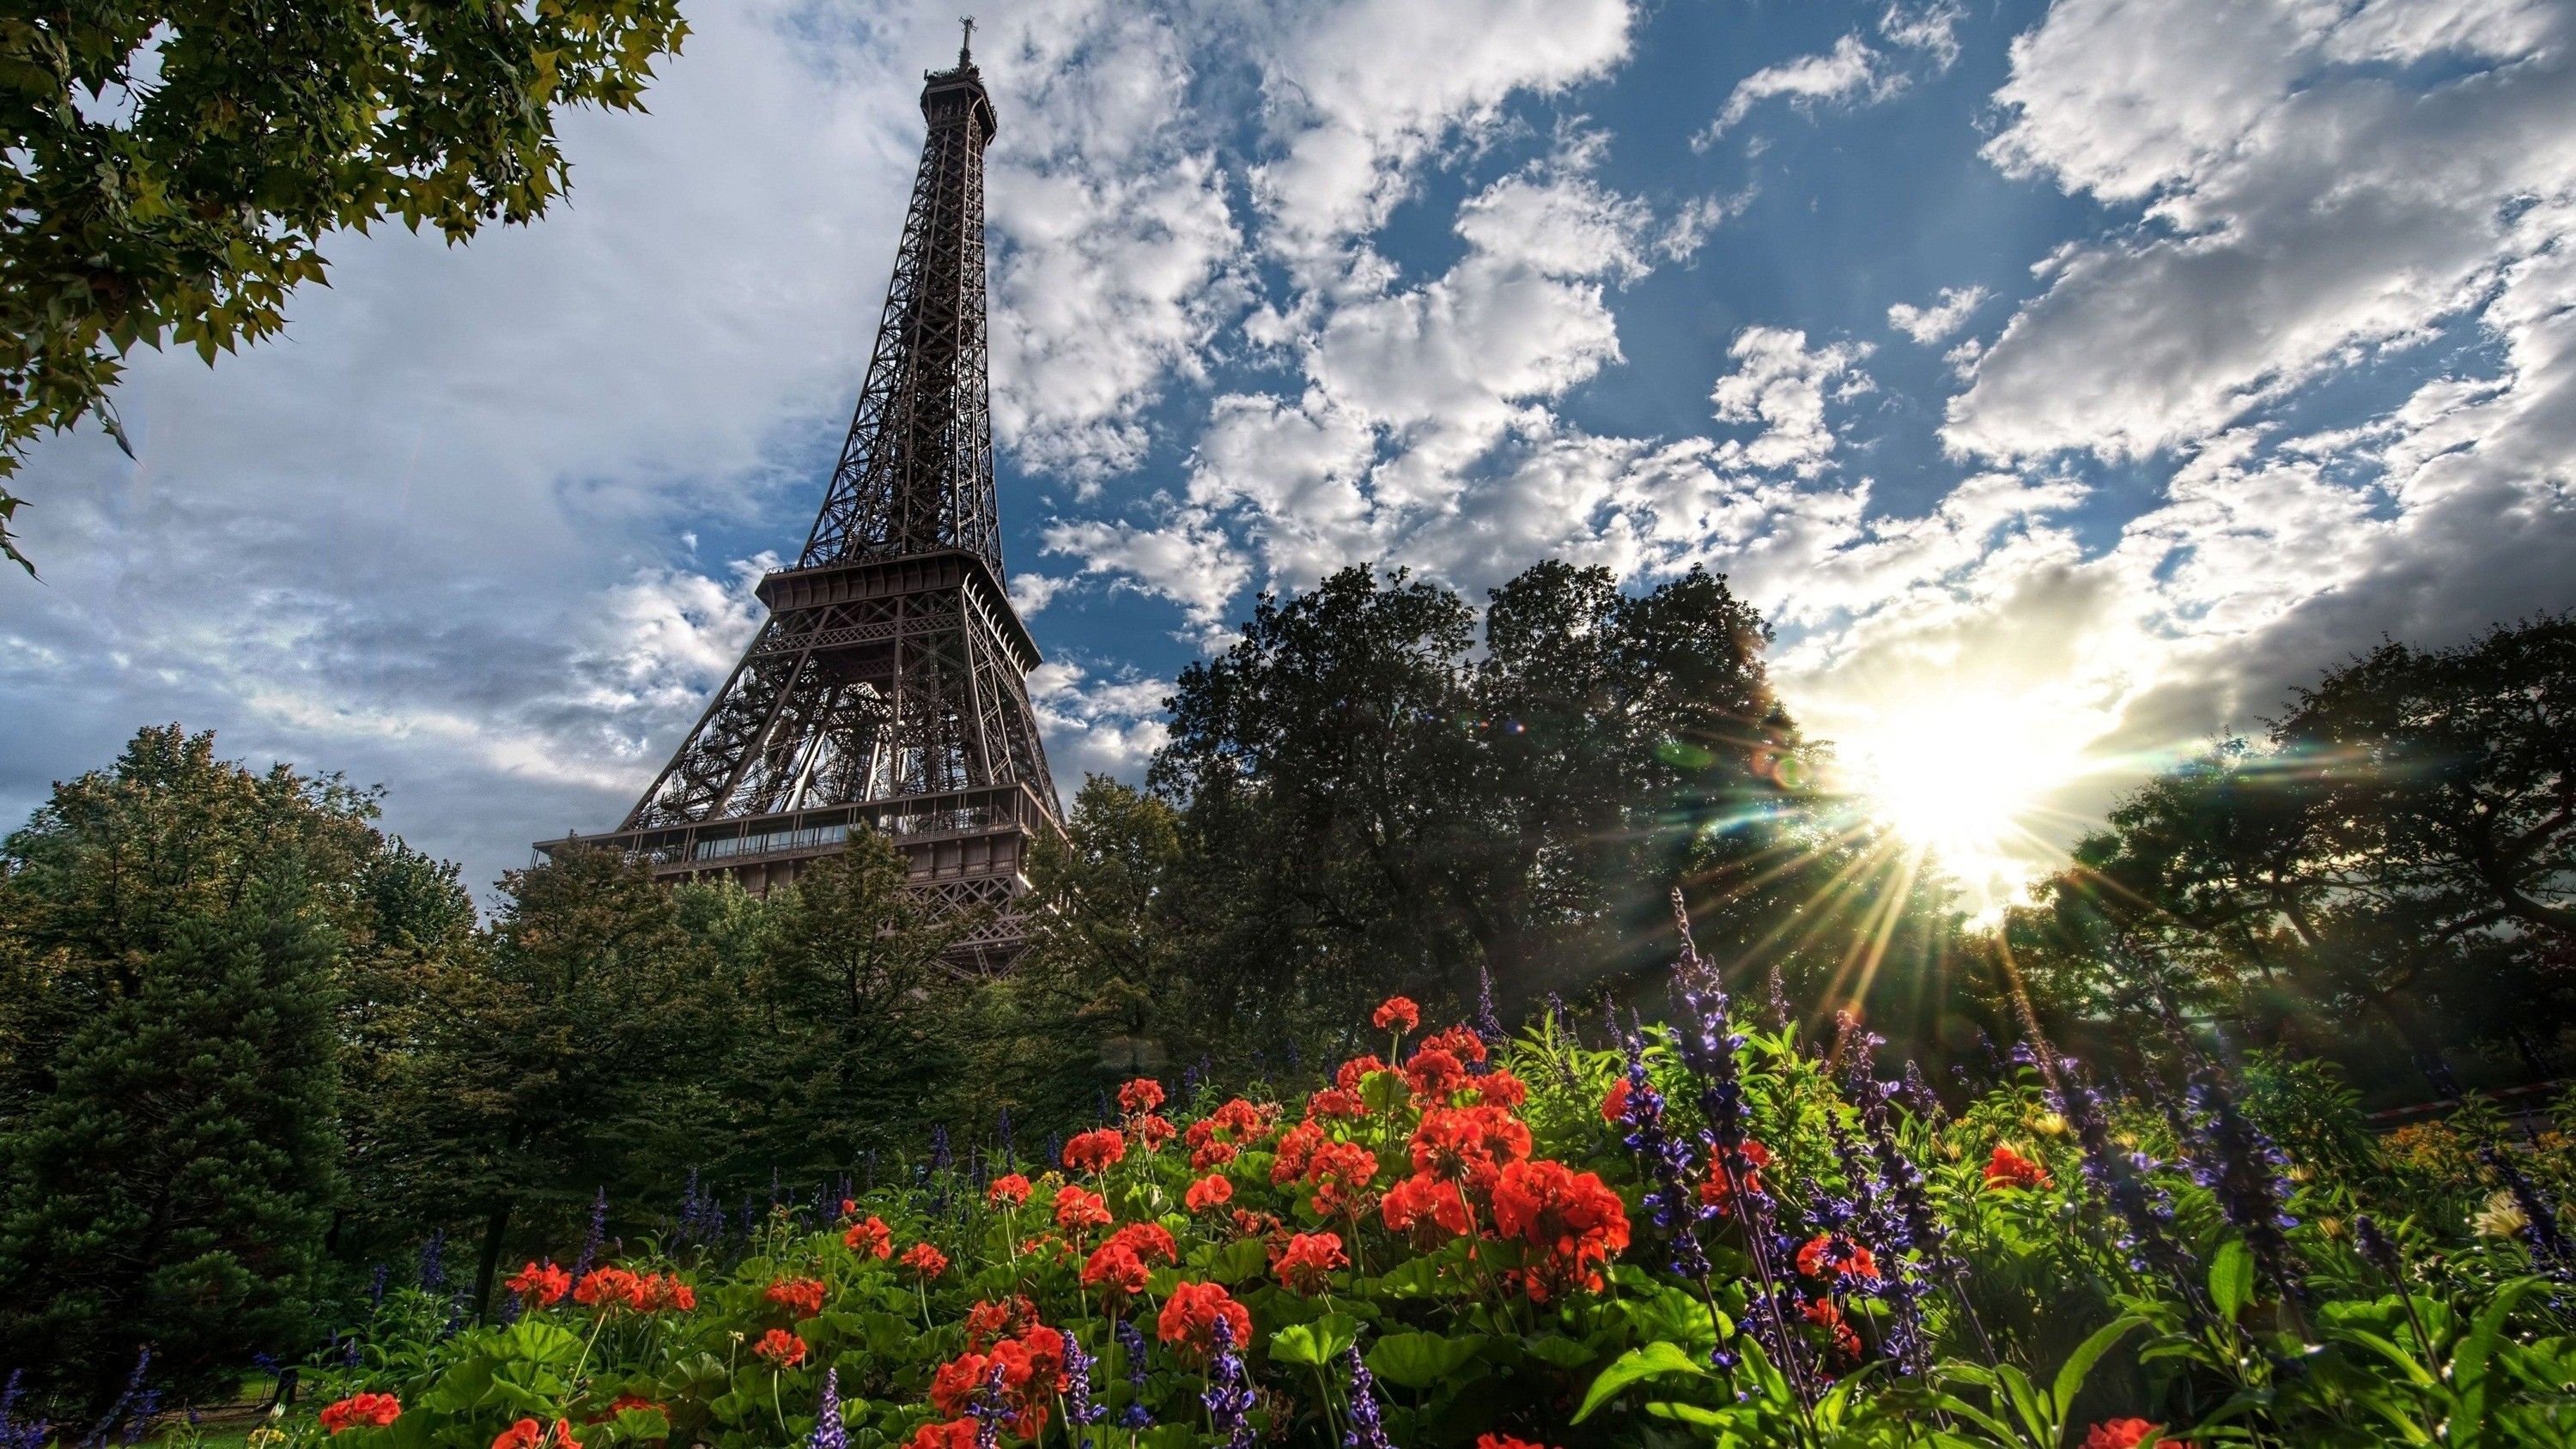 Eiffel Tower HD Wallpaper Image Picture Photo Download